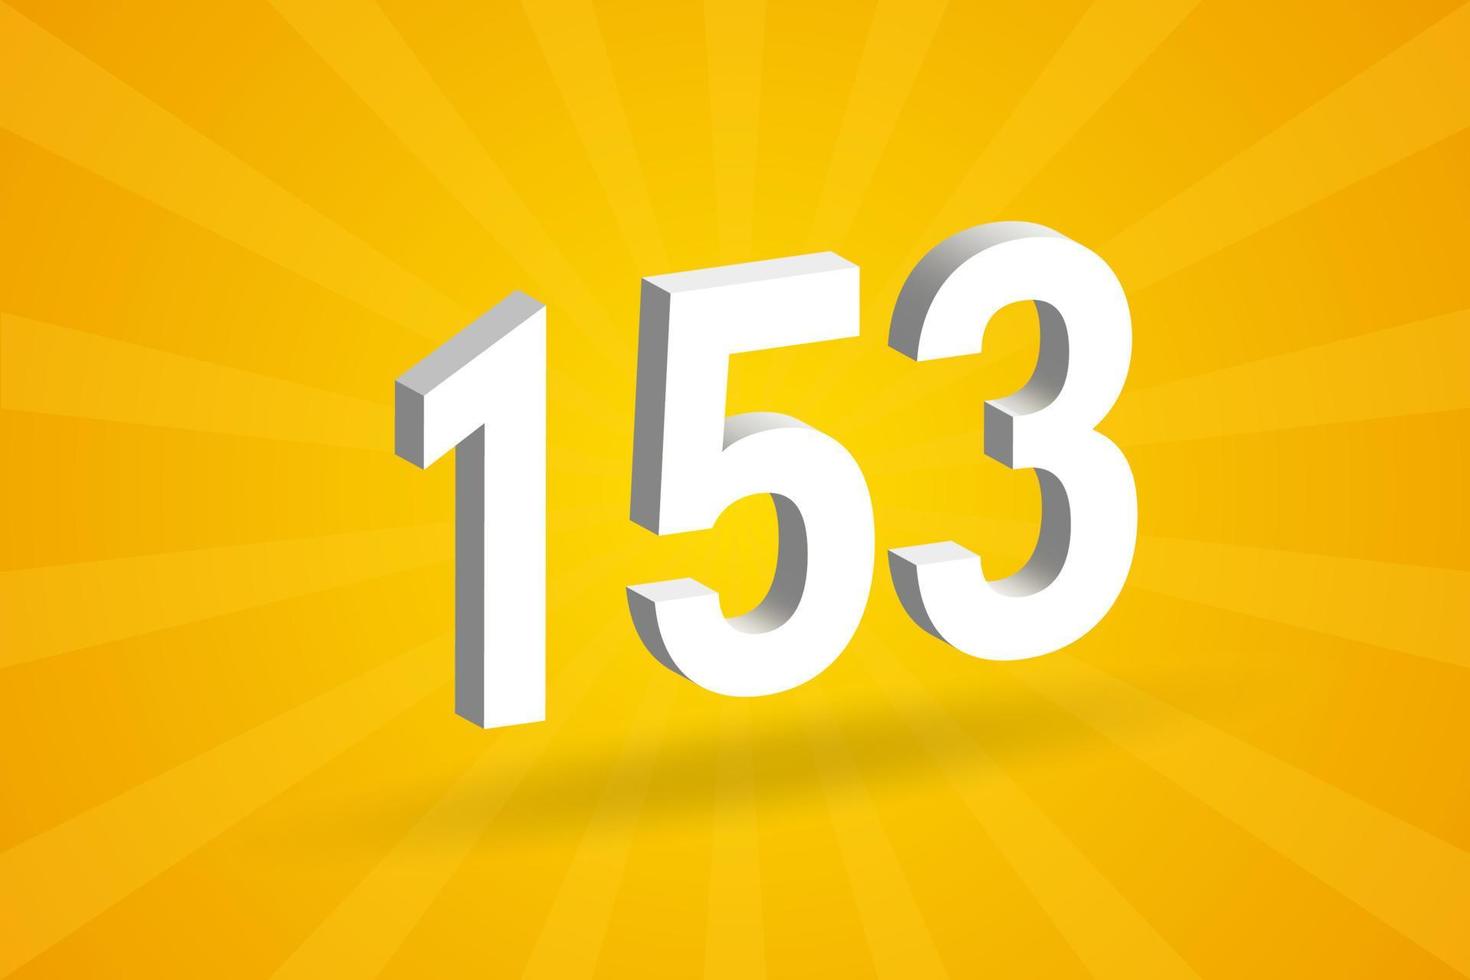 3D 153 number font alphabet. White 3D Number 153 with yellow background vector